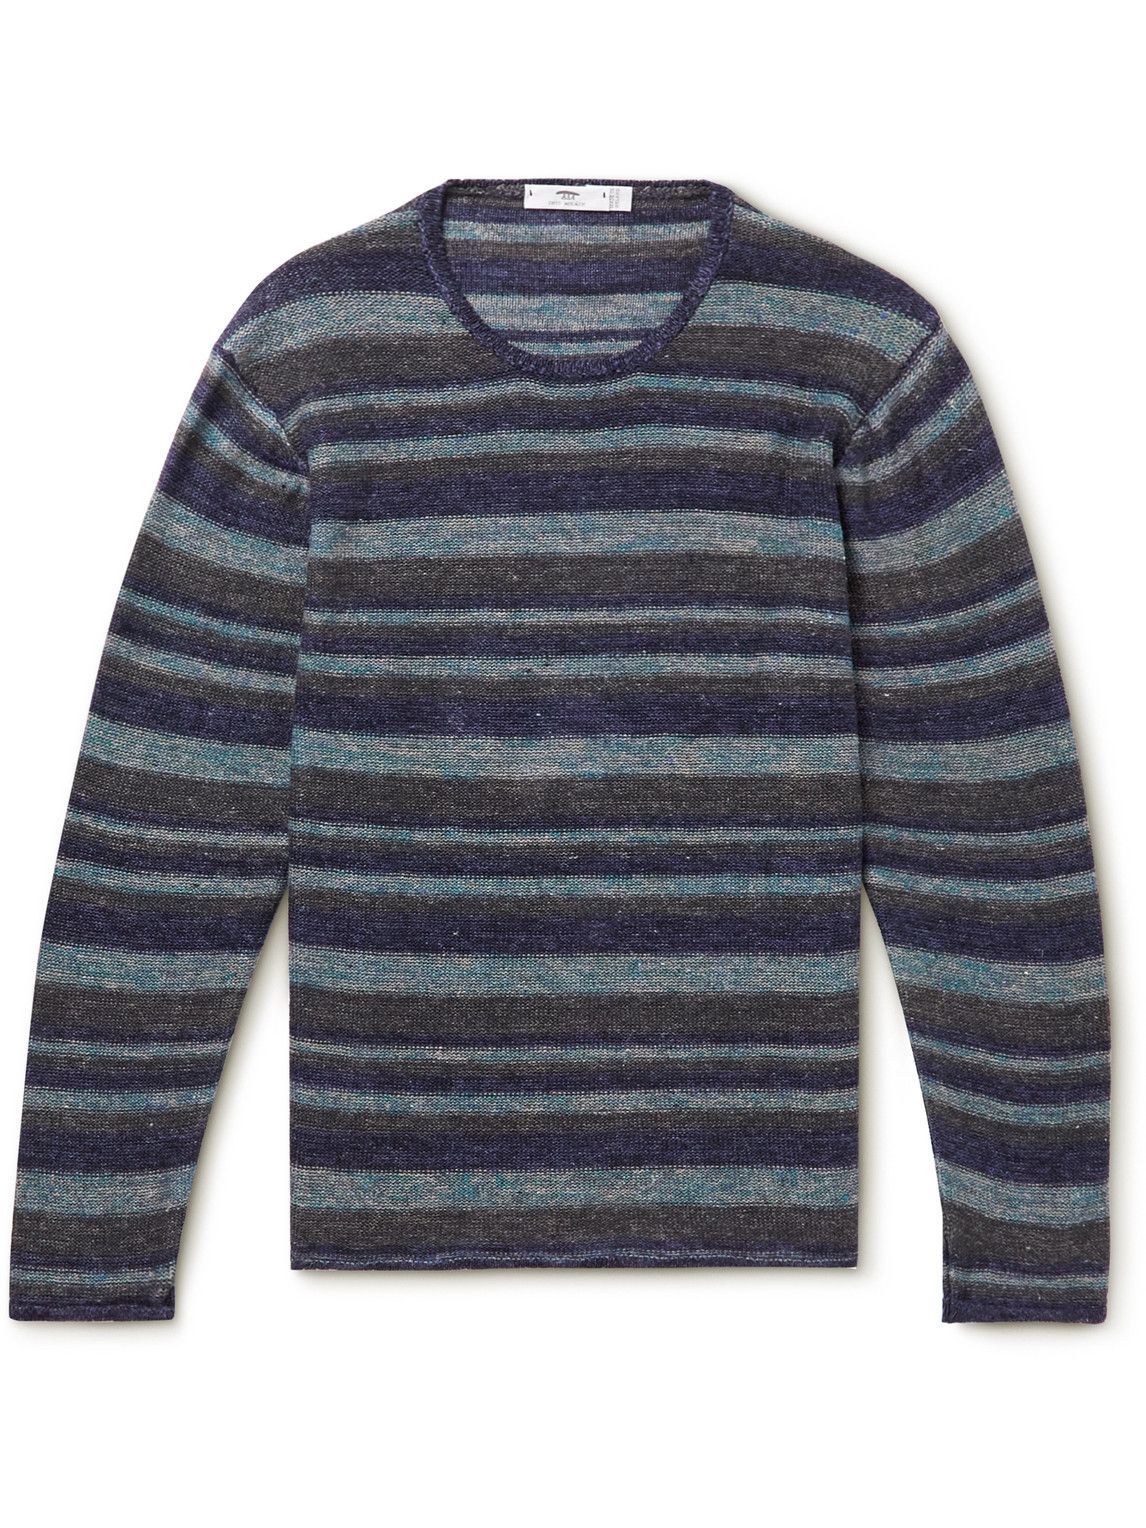 Inis Meáin - Striped Linen Sweater - Blue Inis Meáin